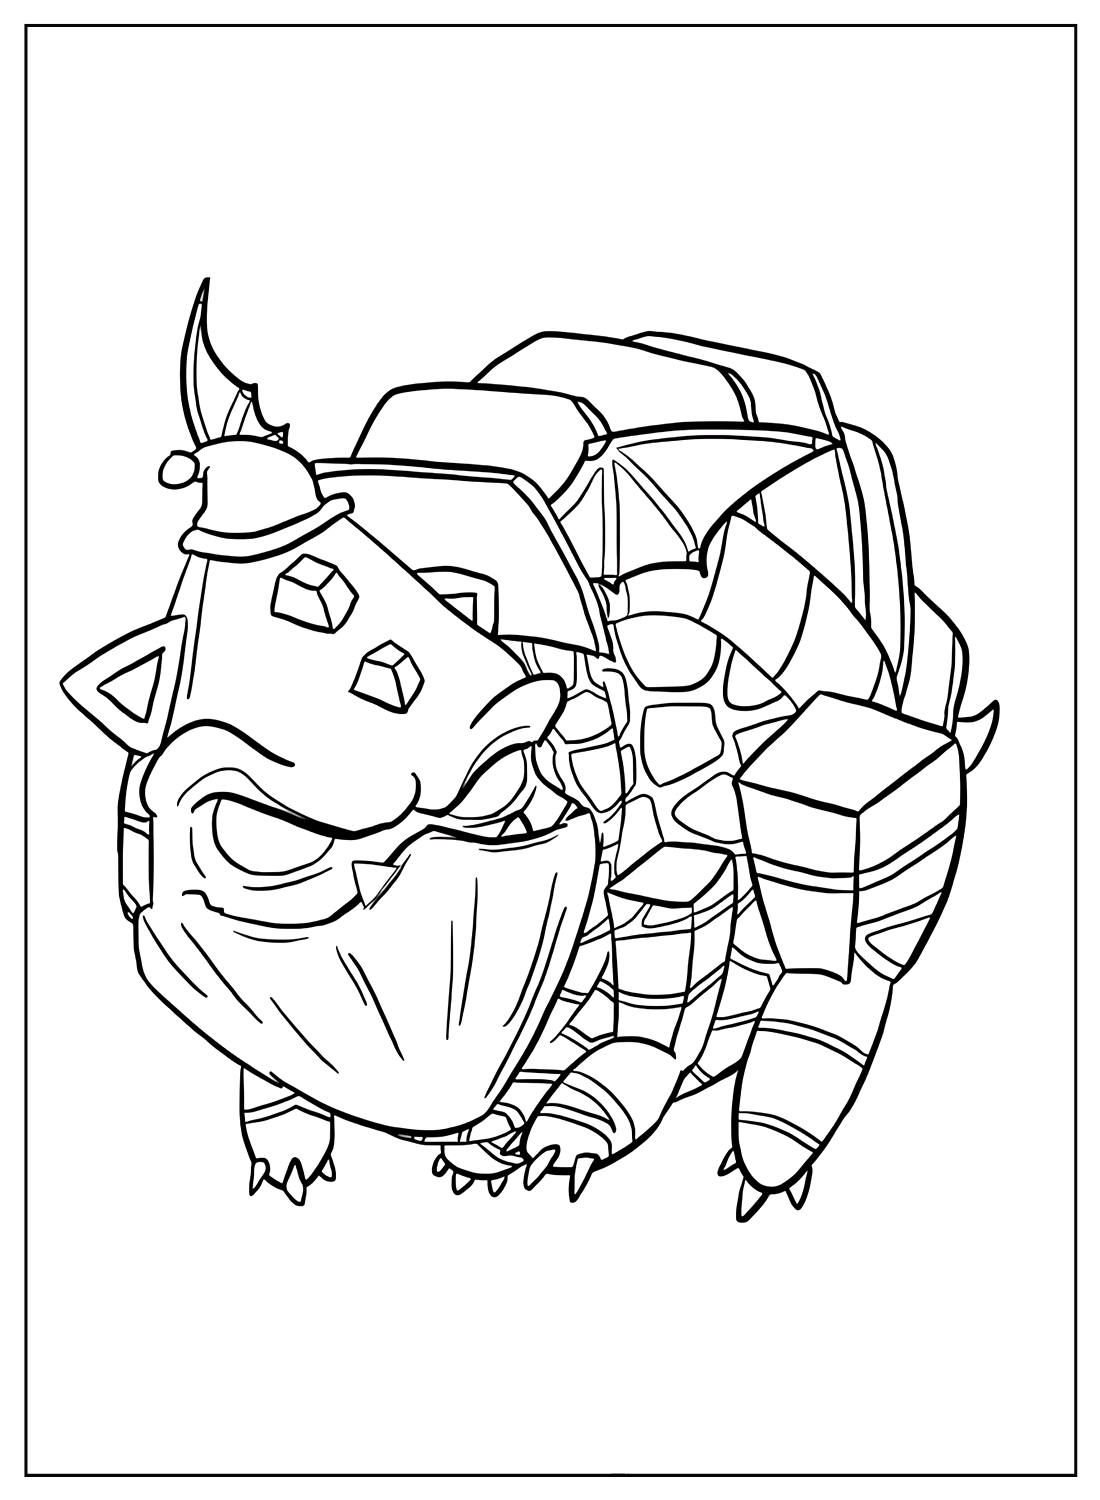 Clash of Clans Coloring Page Free from Clash of Clans